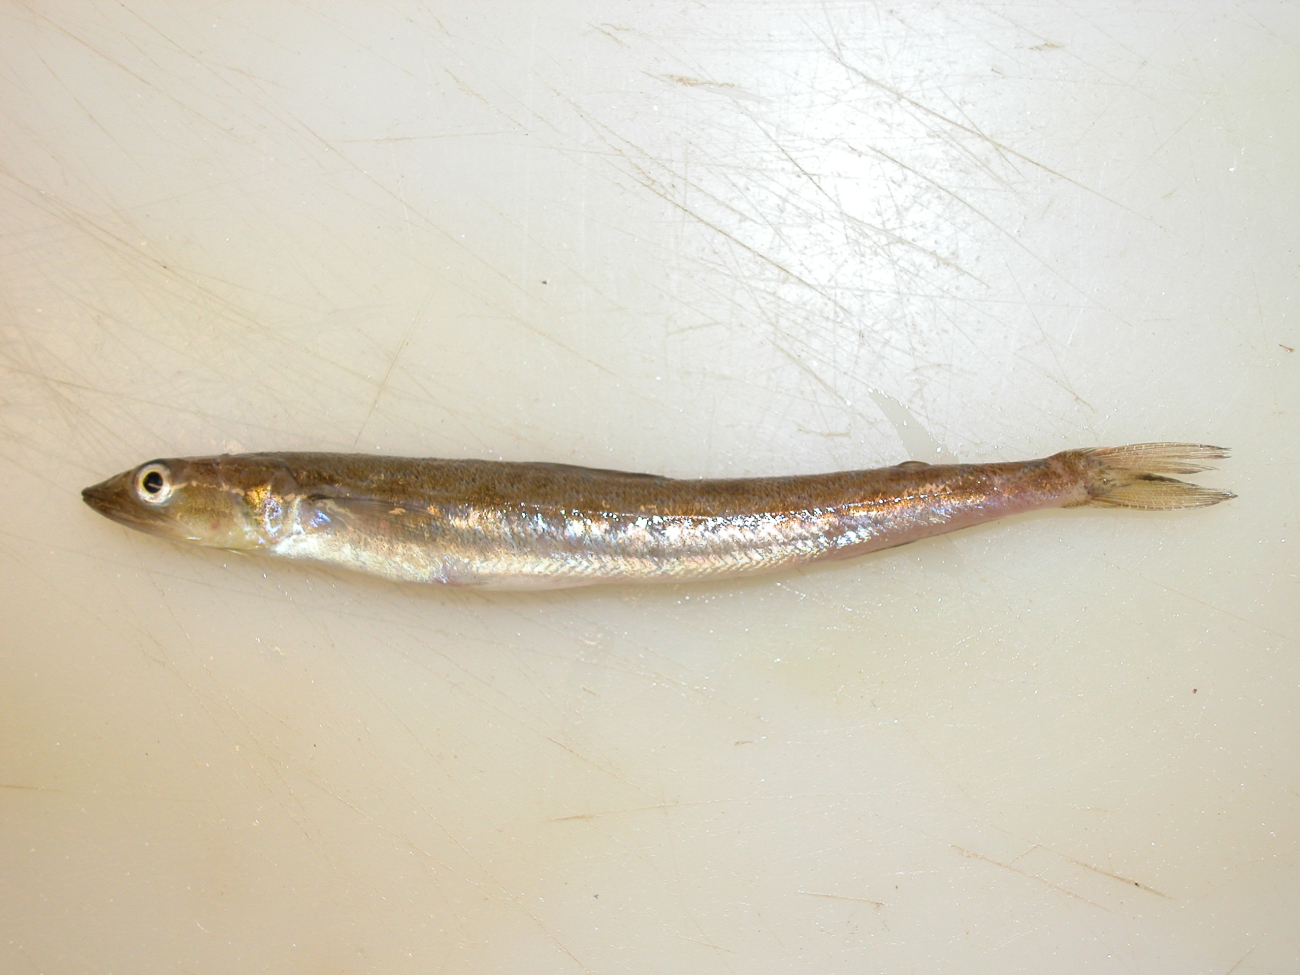 Small silvery fish caught during trawling operations